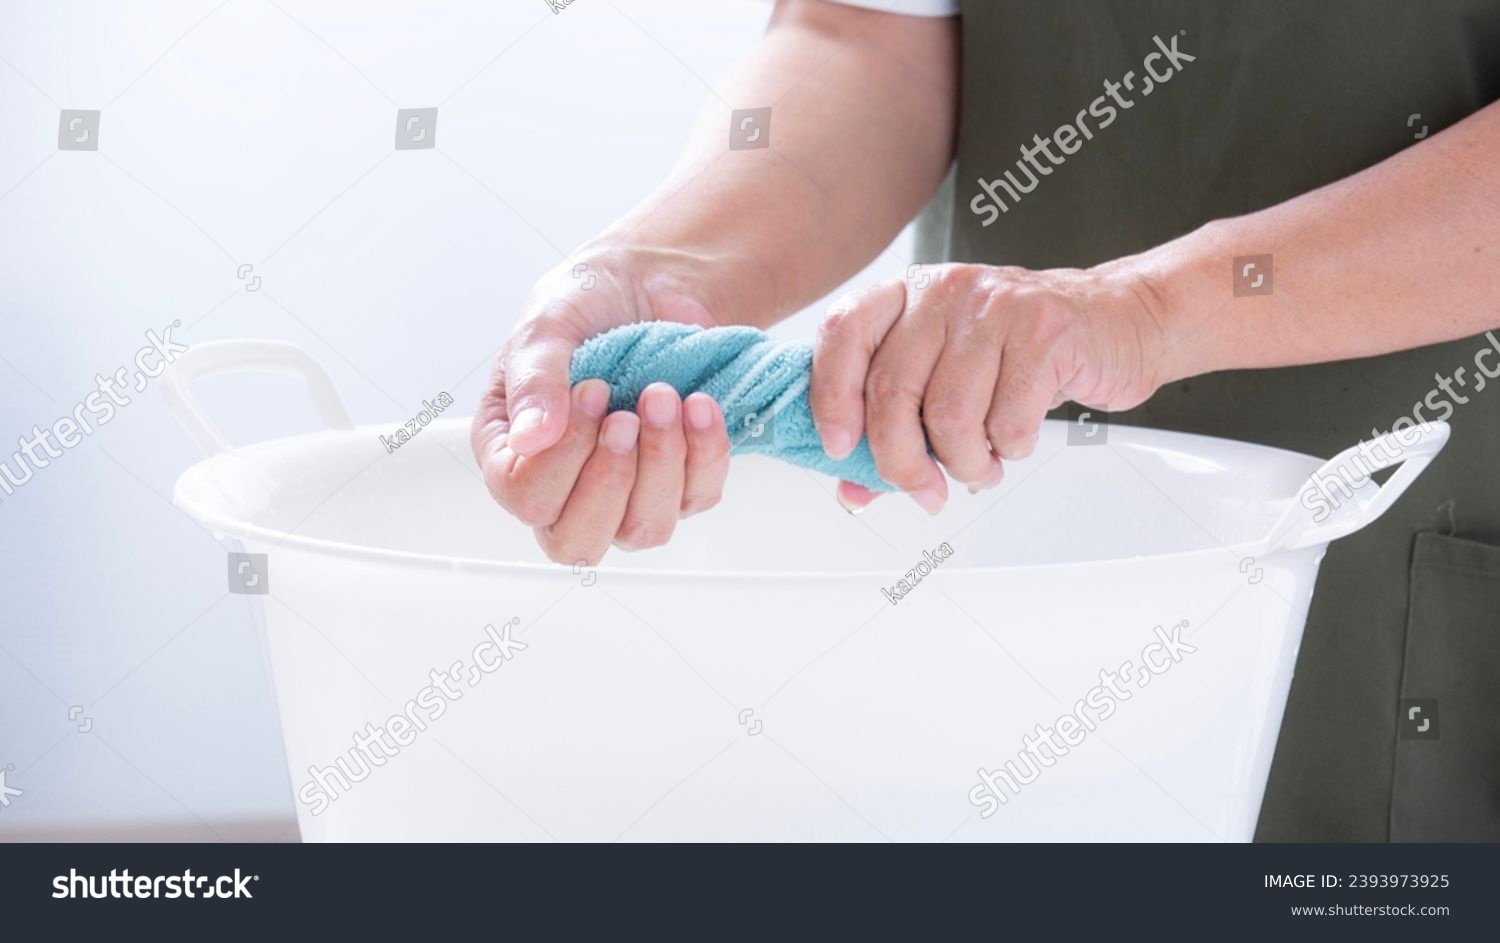 A woman's hand wringing a rag for cleaning,
Hands of a woman squeezing laundry
 #2393973925